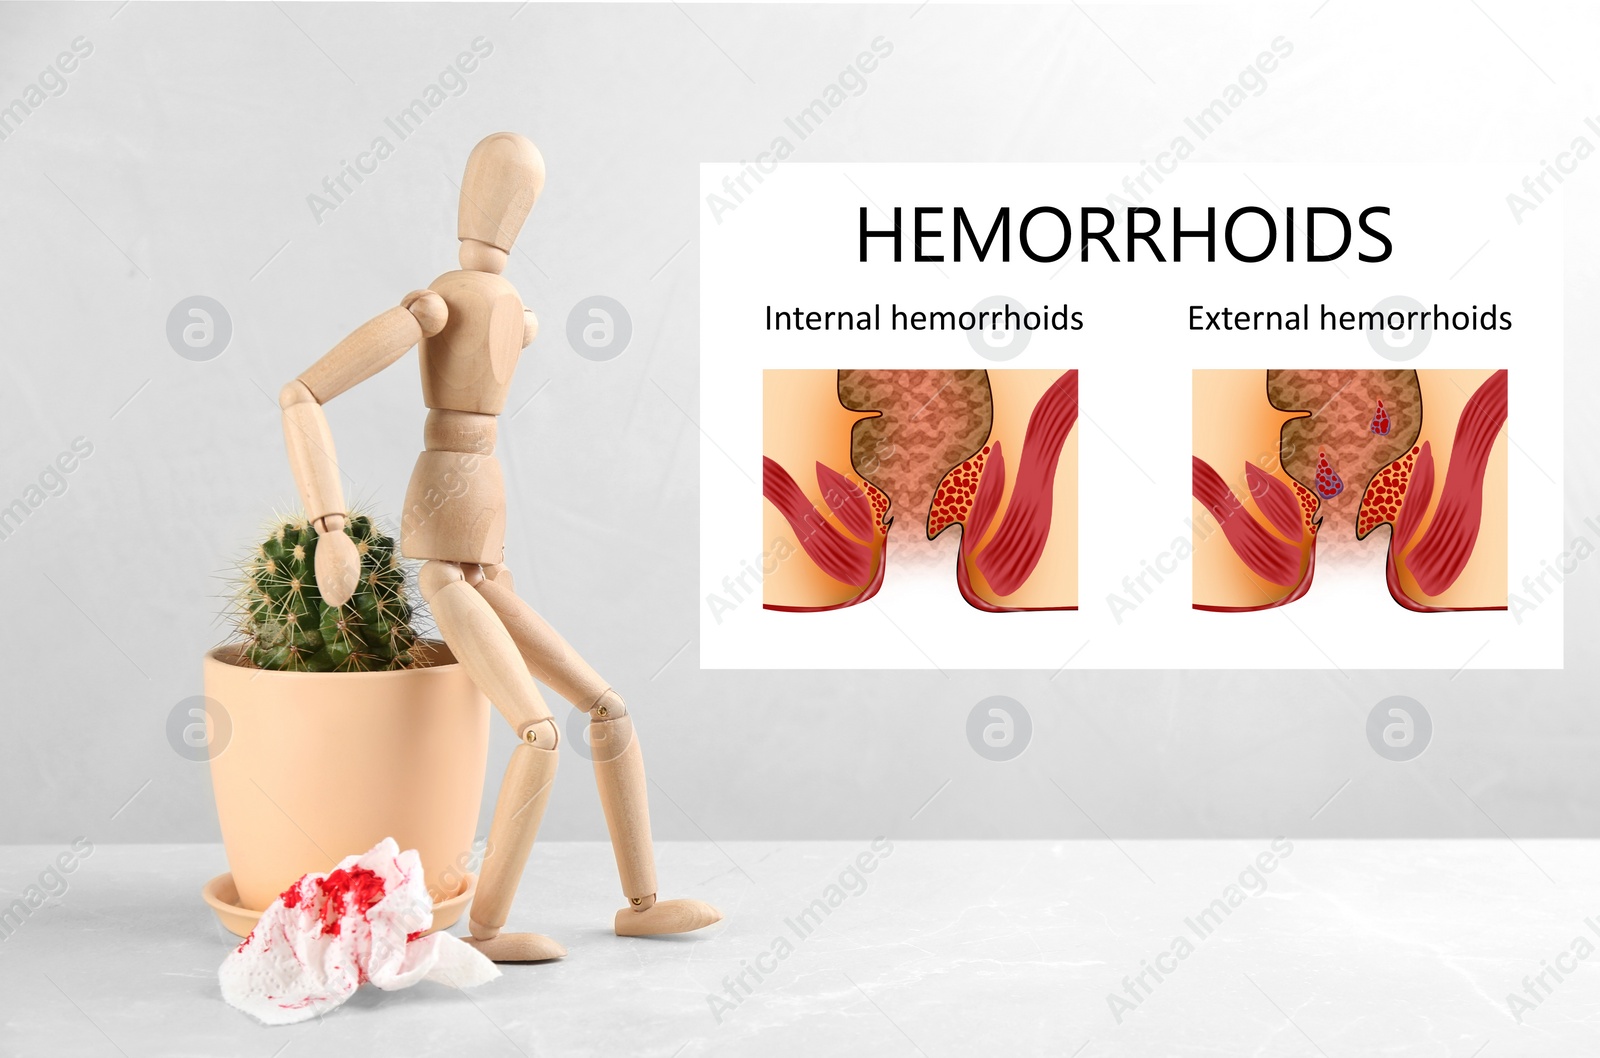 Image of Hemorrhoids. Wooden human figure near cactus and illustrations of unhealthy lower rectum